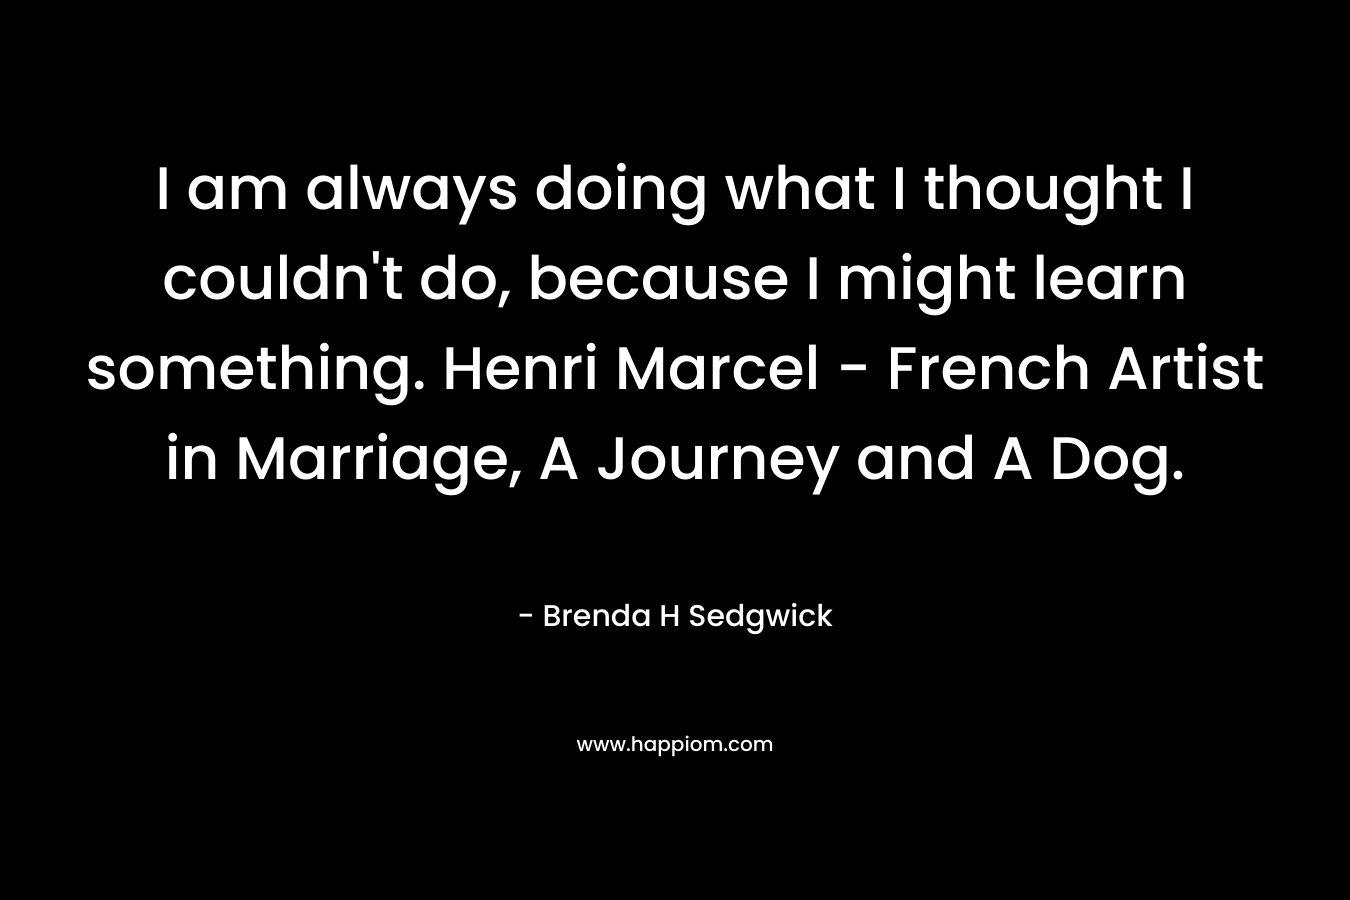 I am always doing what I thought I couldn’t do, because I might learn something. Henri Marcel – French Artist in Marriage, A Journey and A Dog. – Brenda H Sedgwick